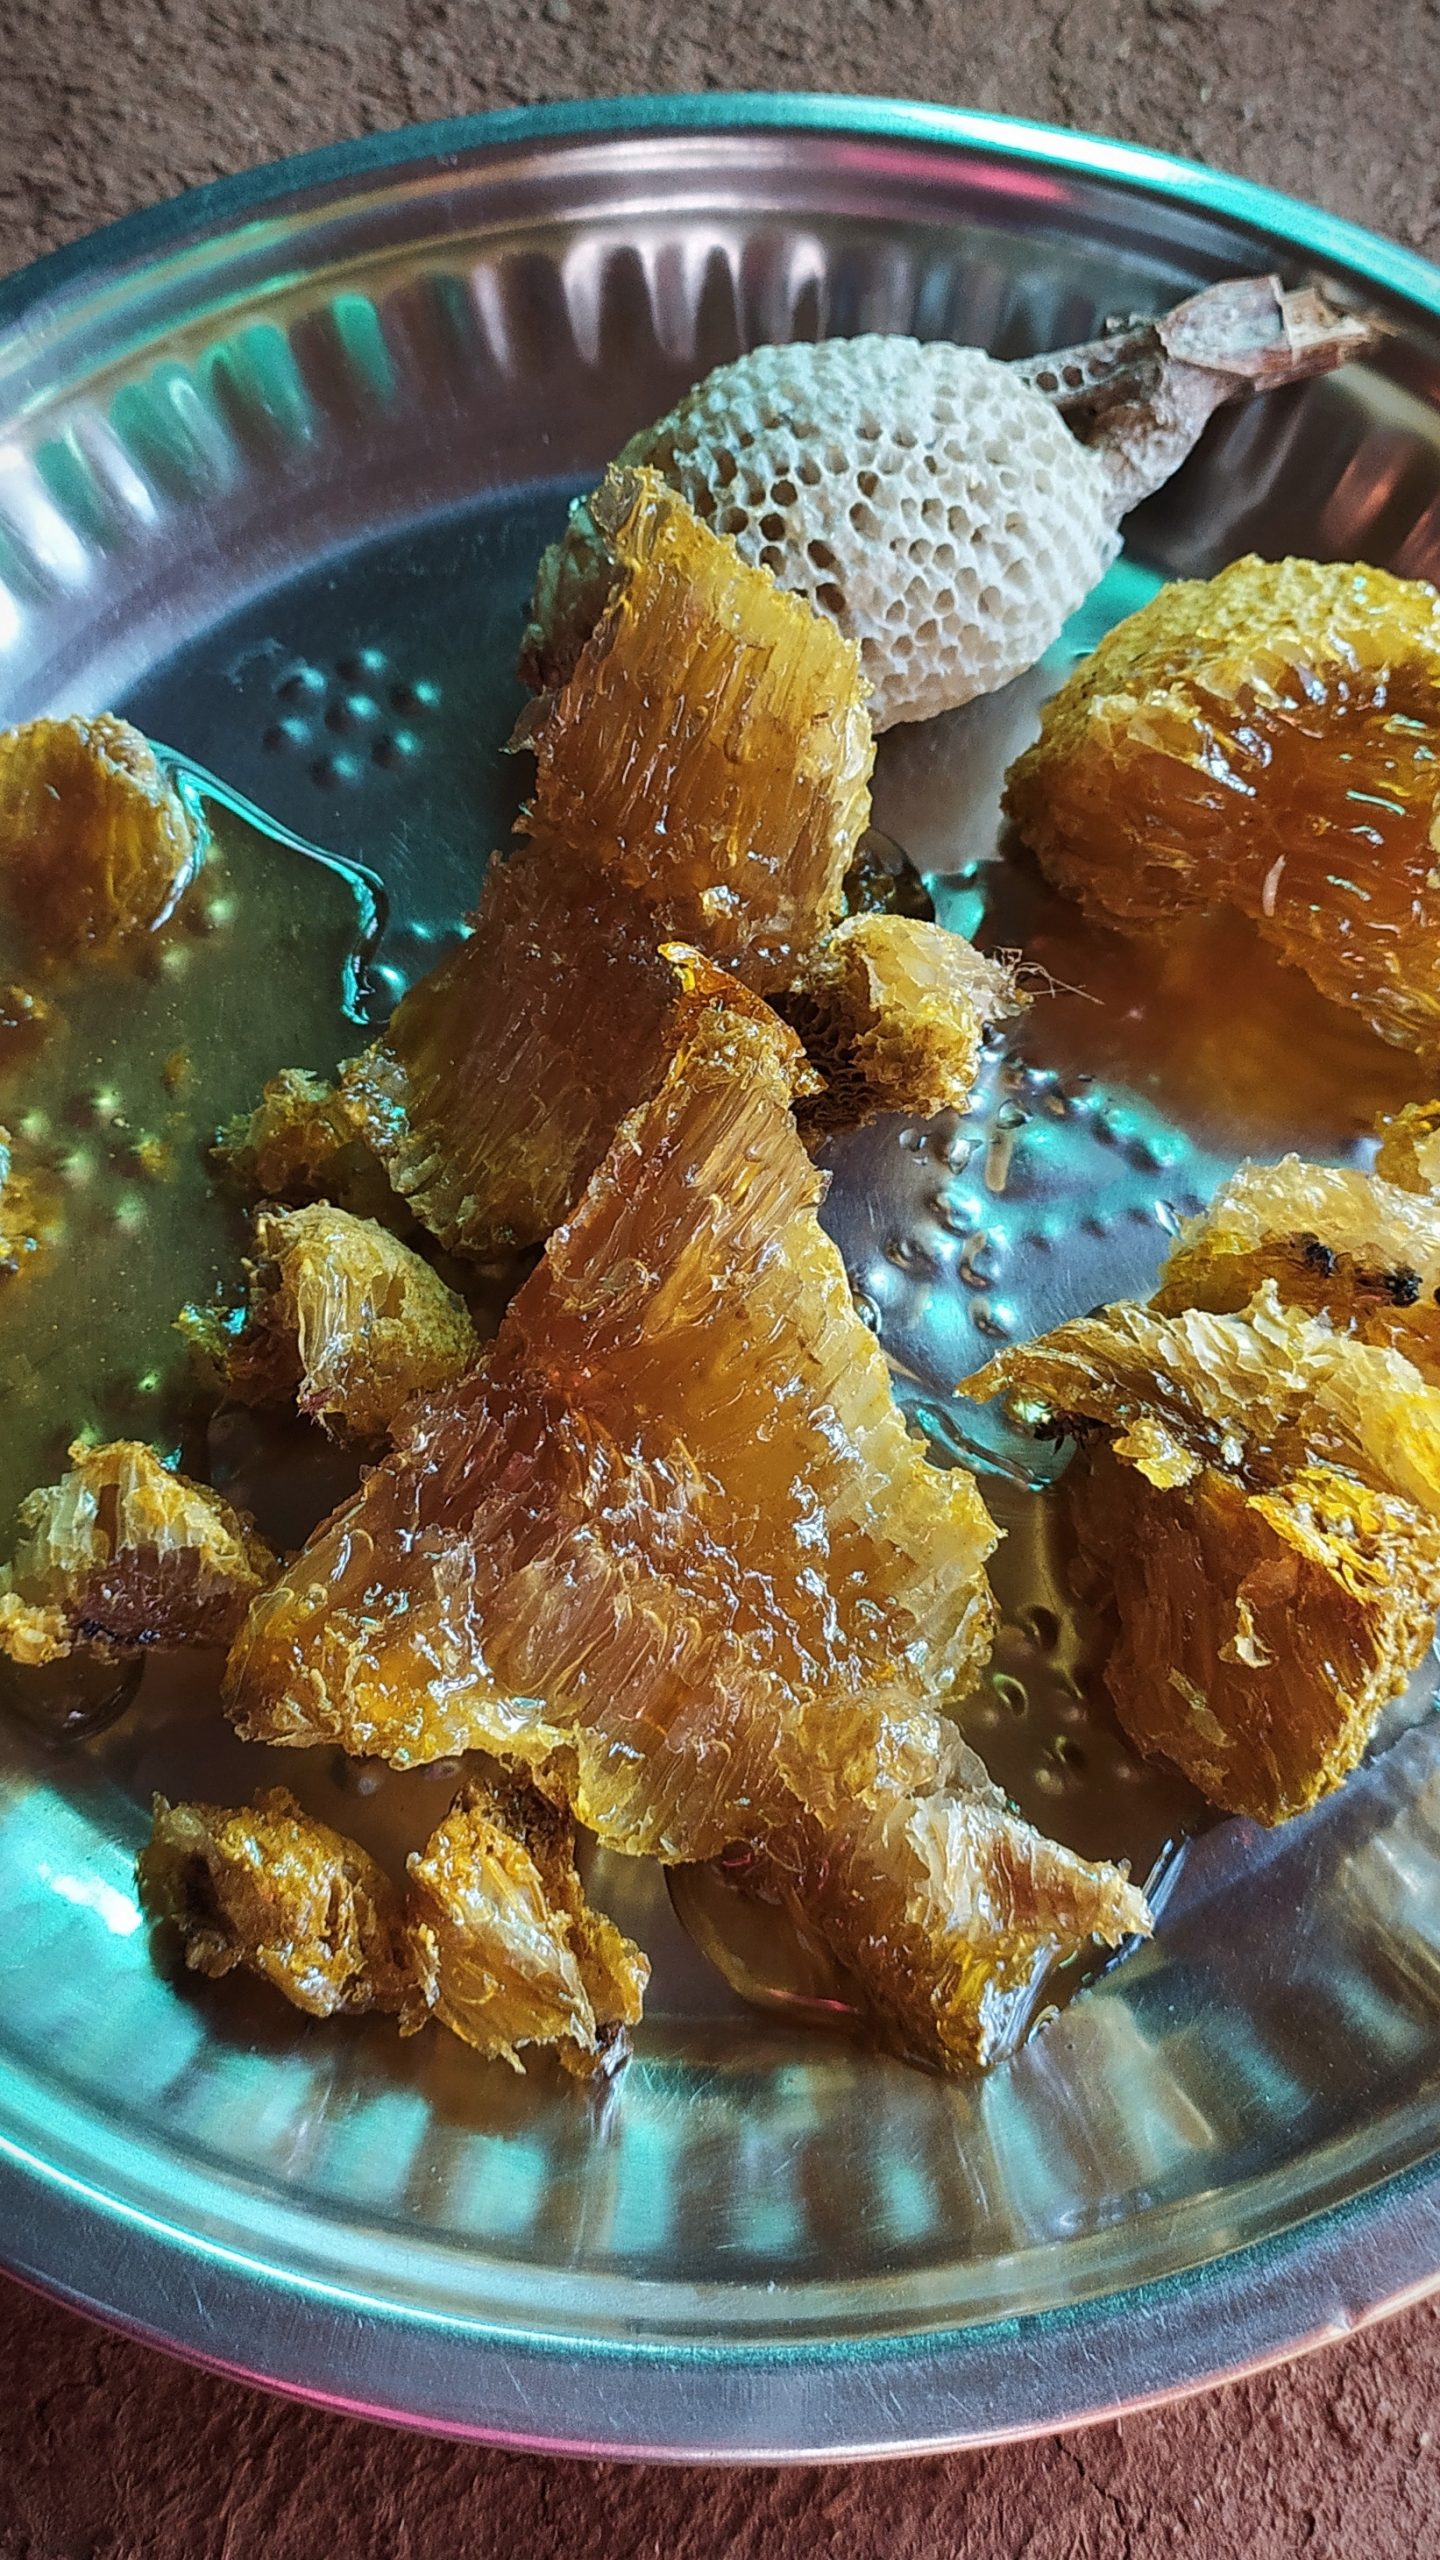 Natural honey in a plate